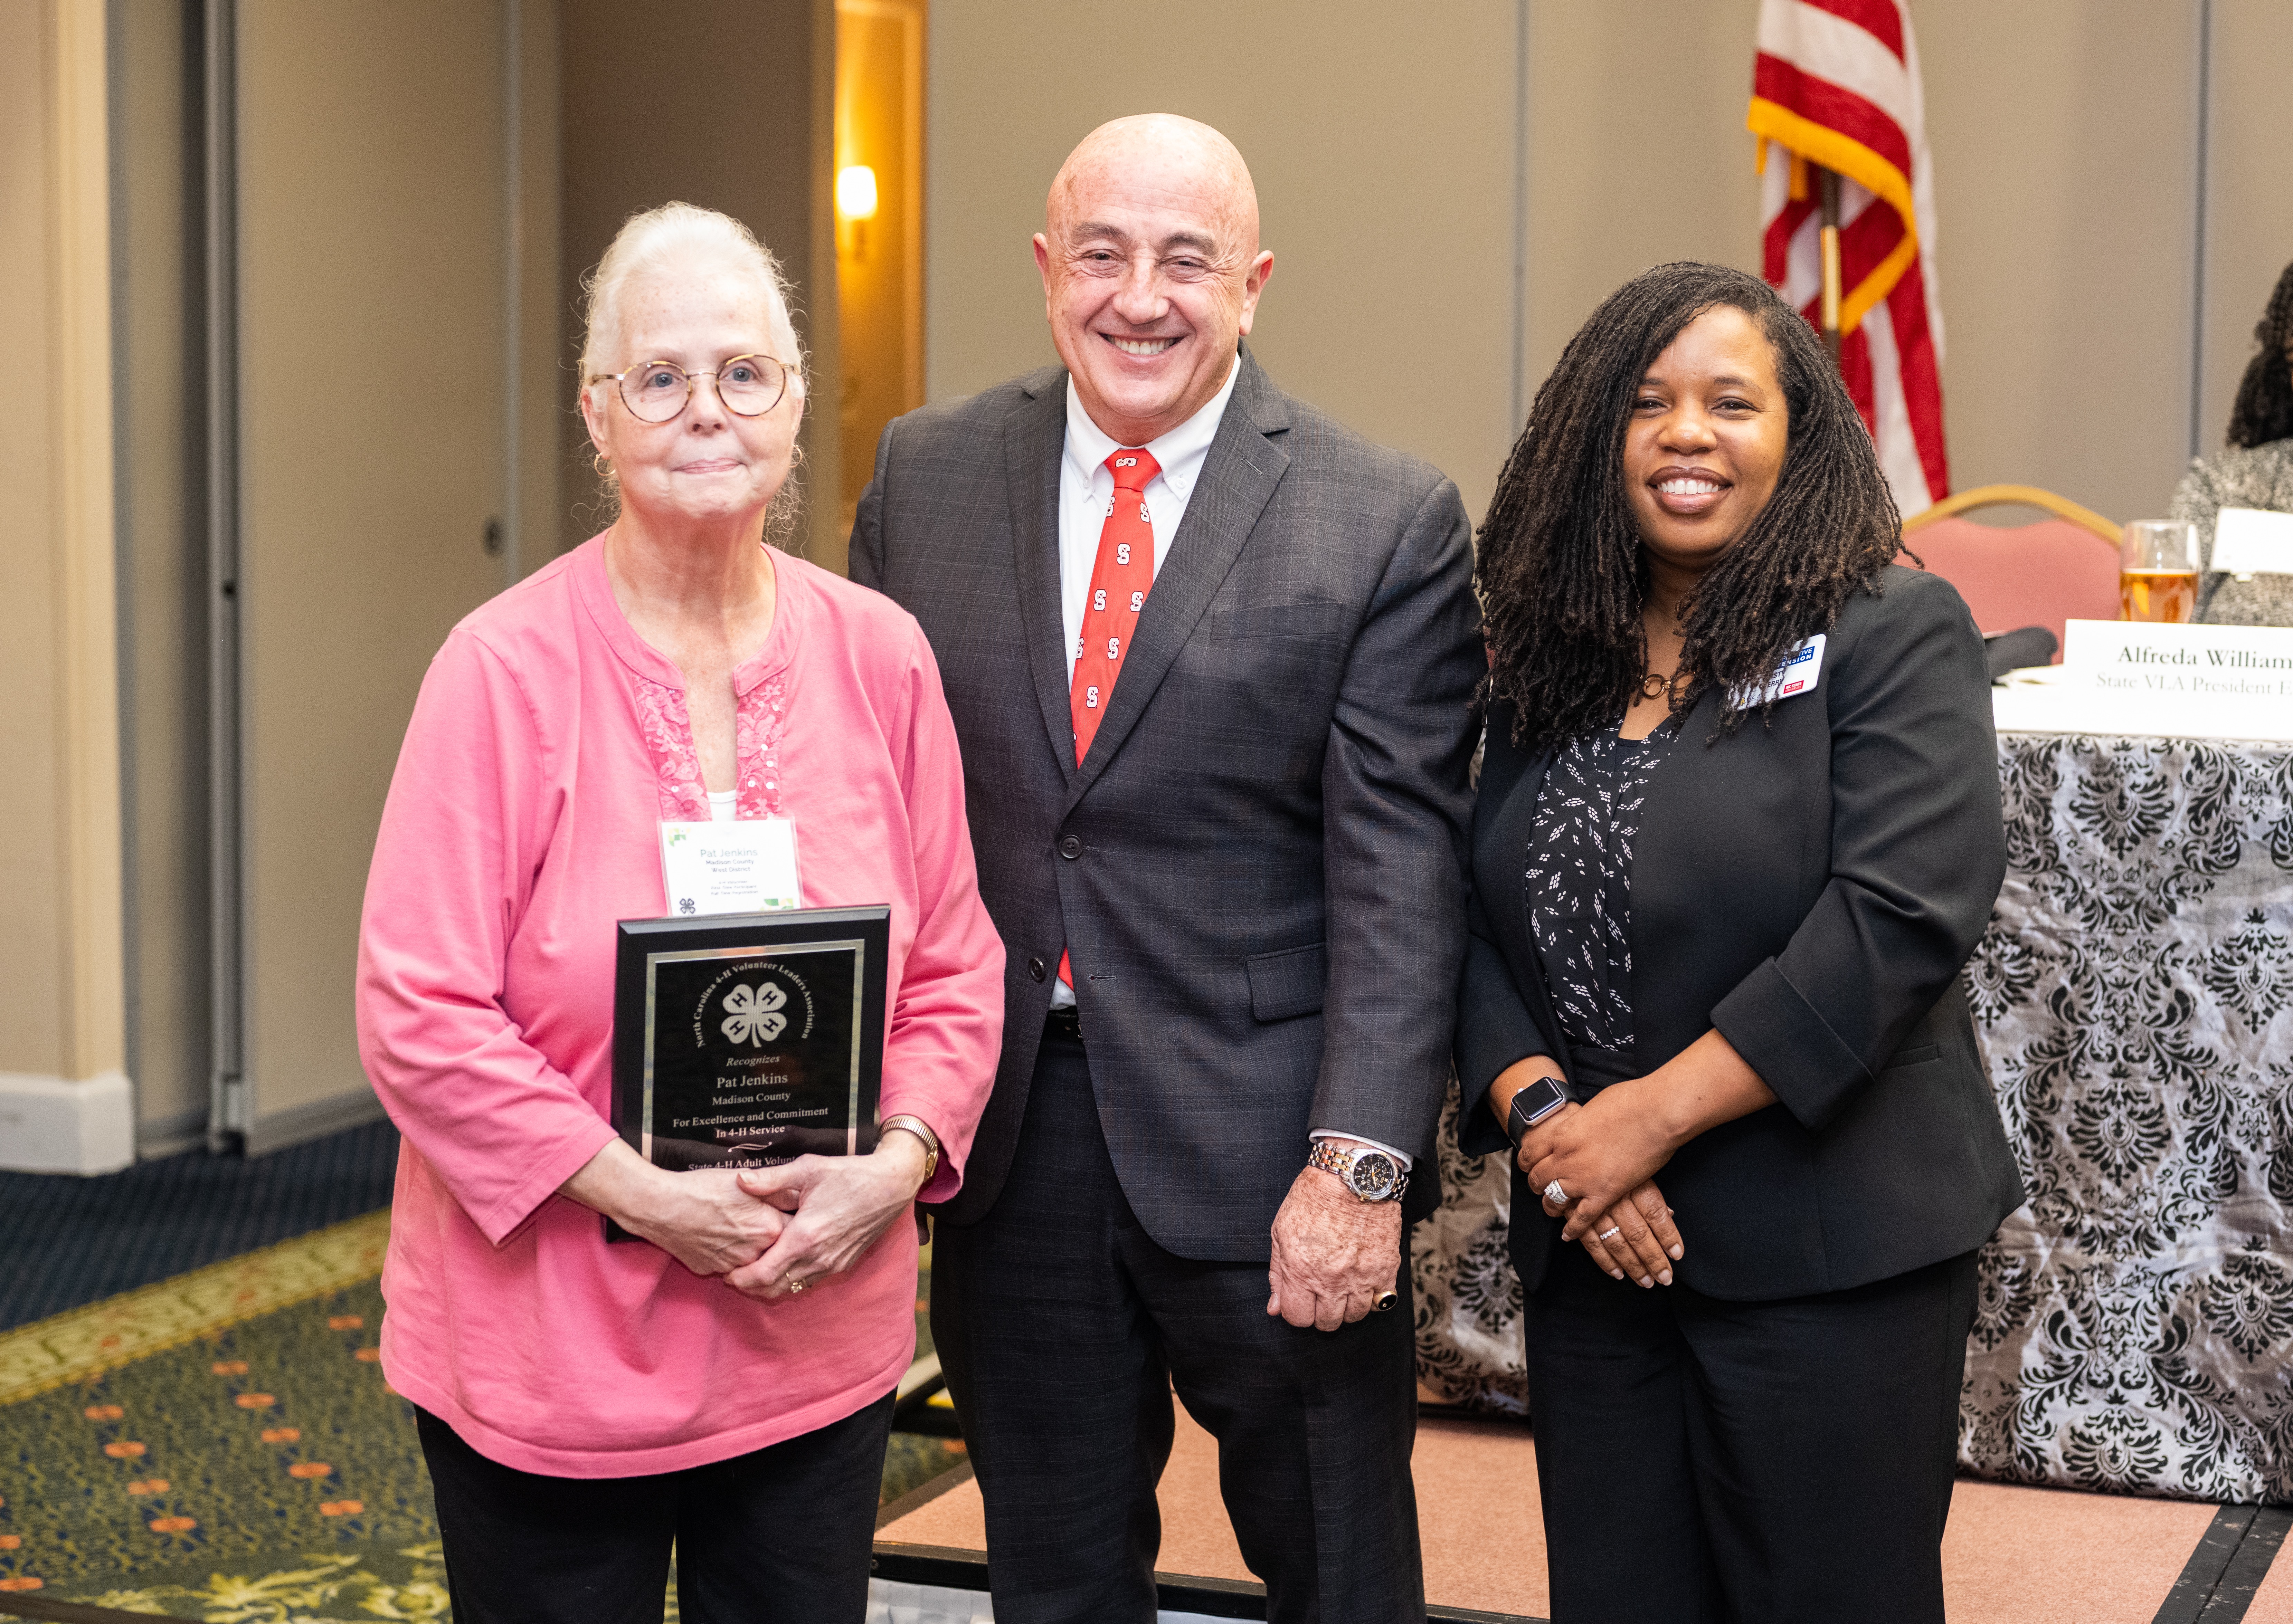 Pat receiving award with Drs. Bonanno & Terry